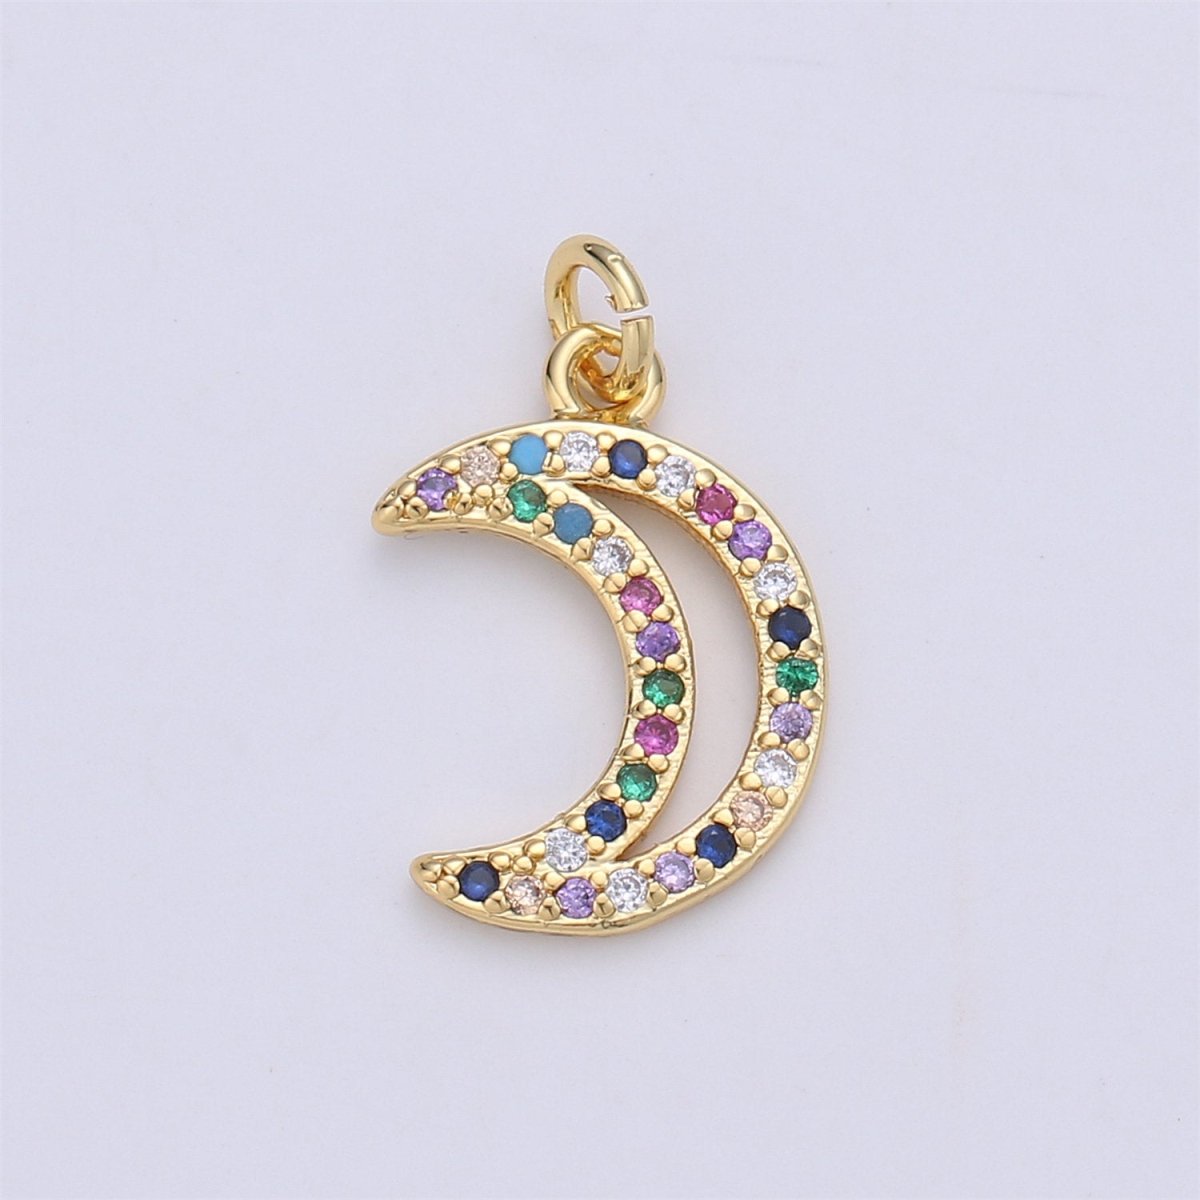 Colorful cubic crescent moon pendant, Nickel Lead free 10x17mm, 18K Gold Filled Charm Micro Pave Celestial Jewelry C-739 - DLUXCA